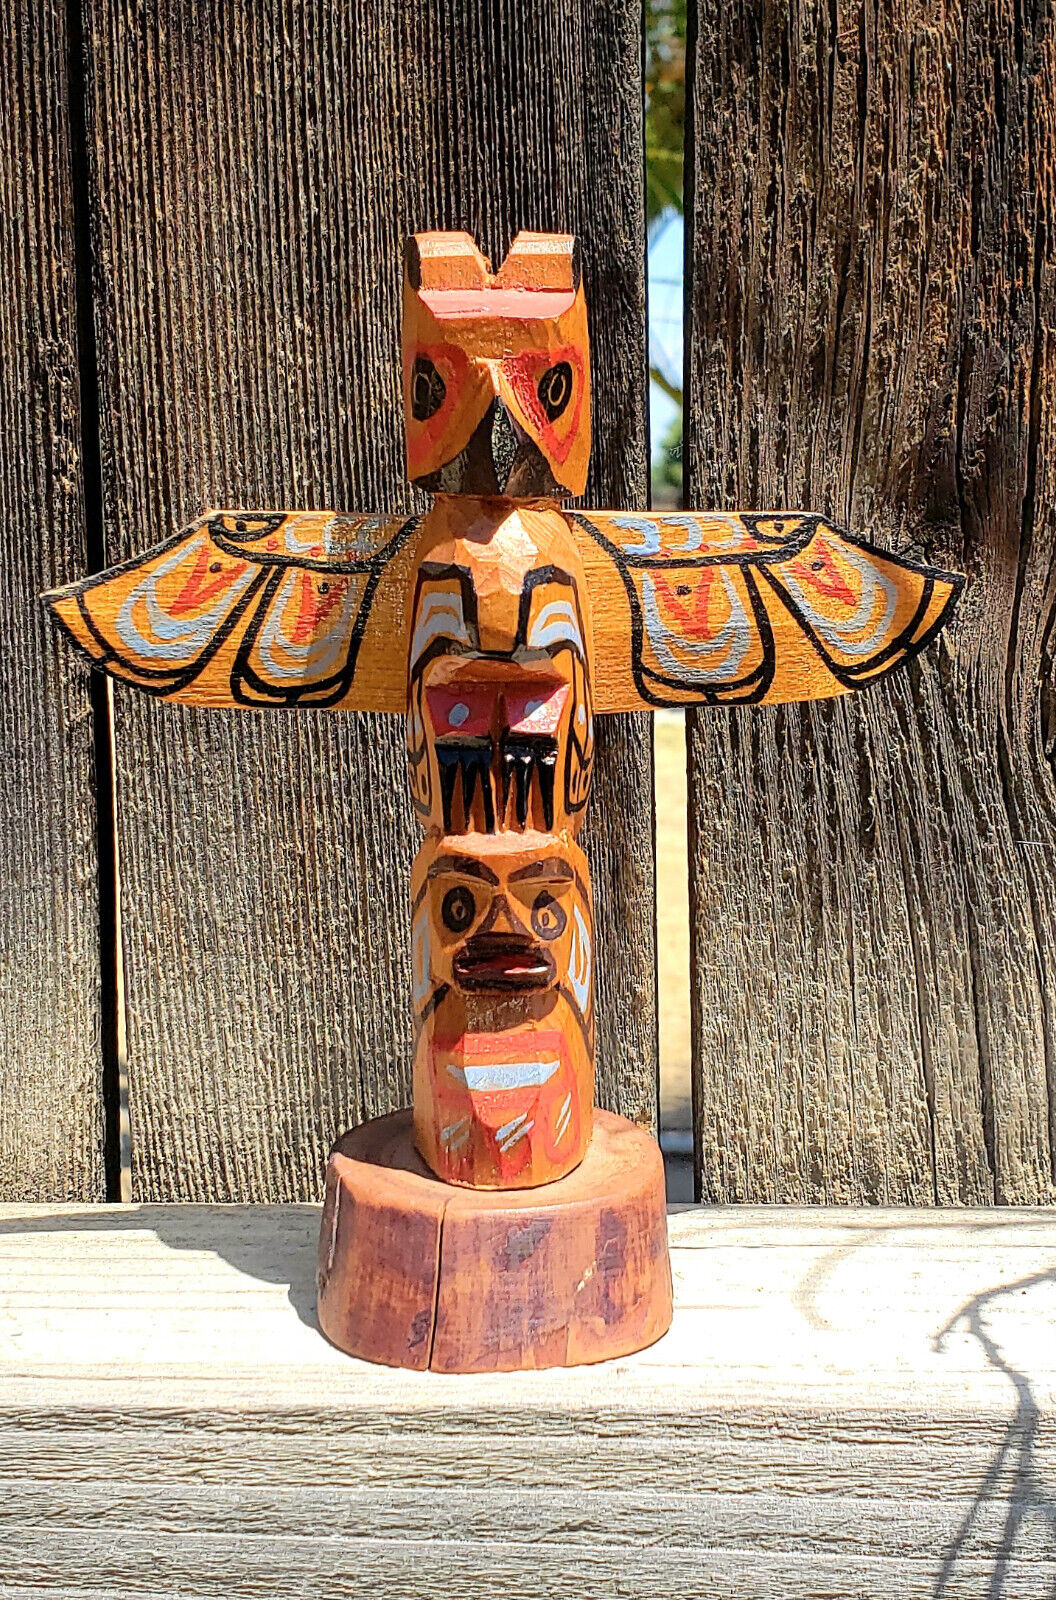 1950-60s NWC TOTEM POLE - STANLEY JAMES (Signed) - Made in Nanaimo, BC - 6 x 5